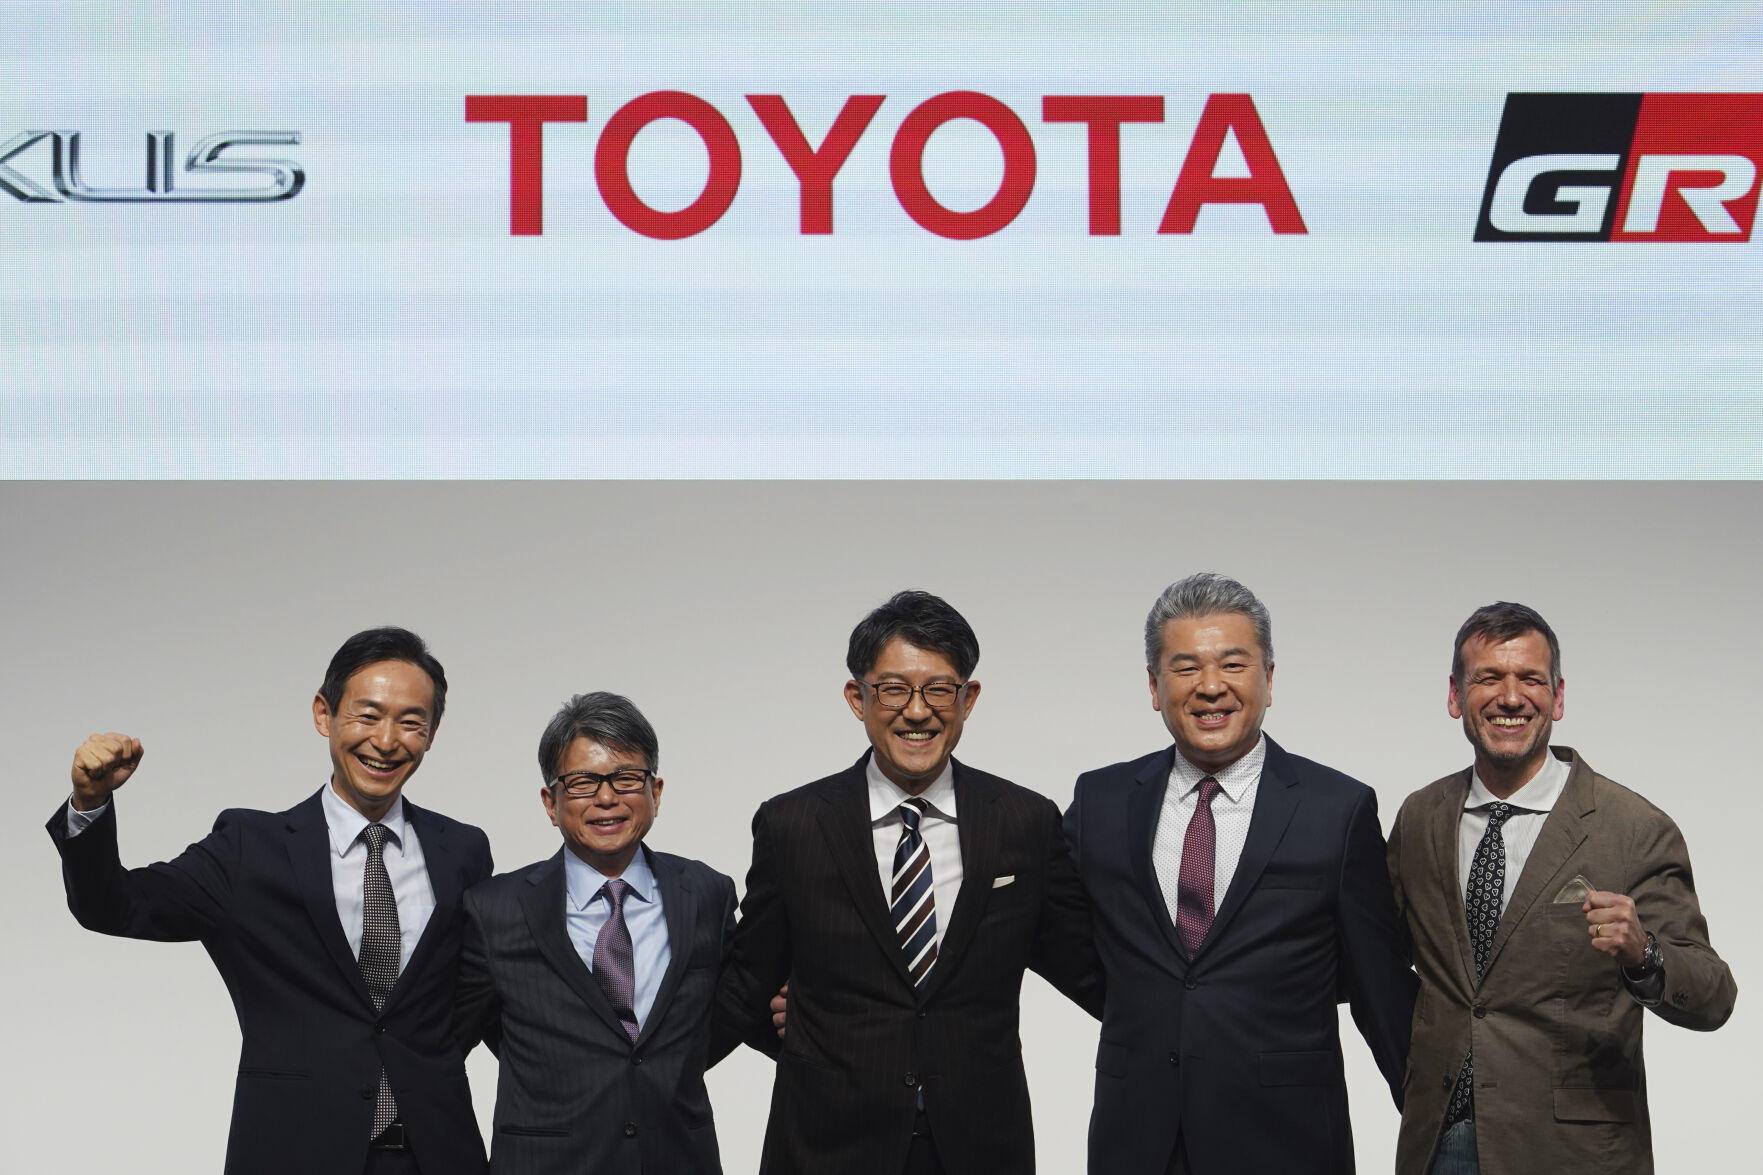 <p>Koji Sato, center, Toyota chief branding officer and CEO-designate poses with his management teams, Kazuaki Shingo, left, chief production officer, Yoichi Miyazaki, second left, executive vice president, CFO, Hiroki Nakajima, second right, executive vice president, CTO, Simon Humphries, right, chief branding officer, during a press conference Monday, Feb. 13, 2023, in Tokyo. Sato, who was appointed the next president at Japan’s top automaker Toyota, introduced a management team Monday that he said will lead an aggressive push on electric vehicles. (AP Photo/Eugene Hoshiko)</p>   PHOTO CREDIT: Eugene Hoshiko 